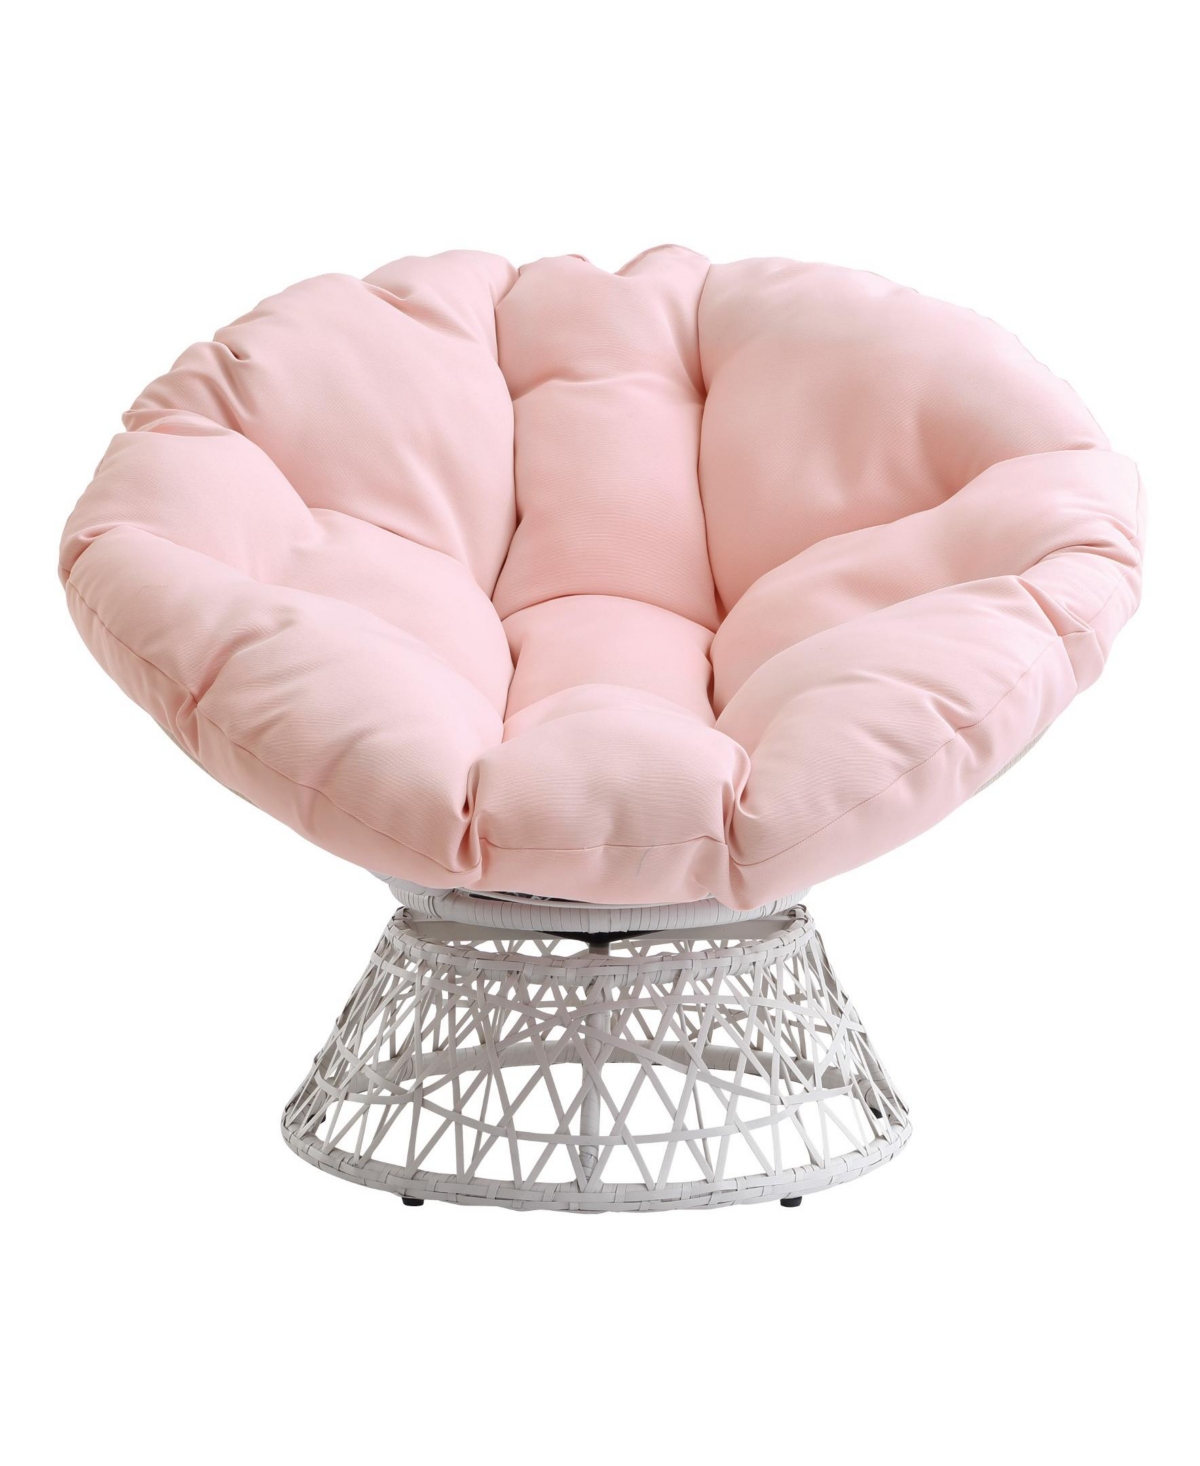 Shop Osp Home Furnishings Papasan Chair With Round Pillow Cushion And Wicker Weave In Pink